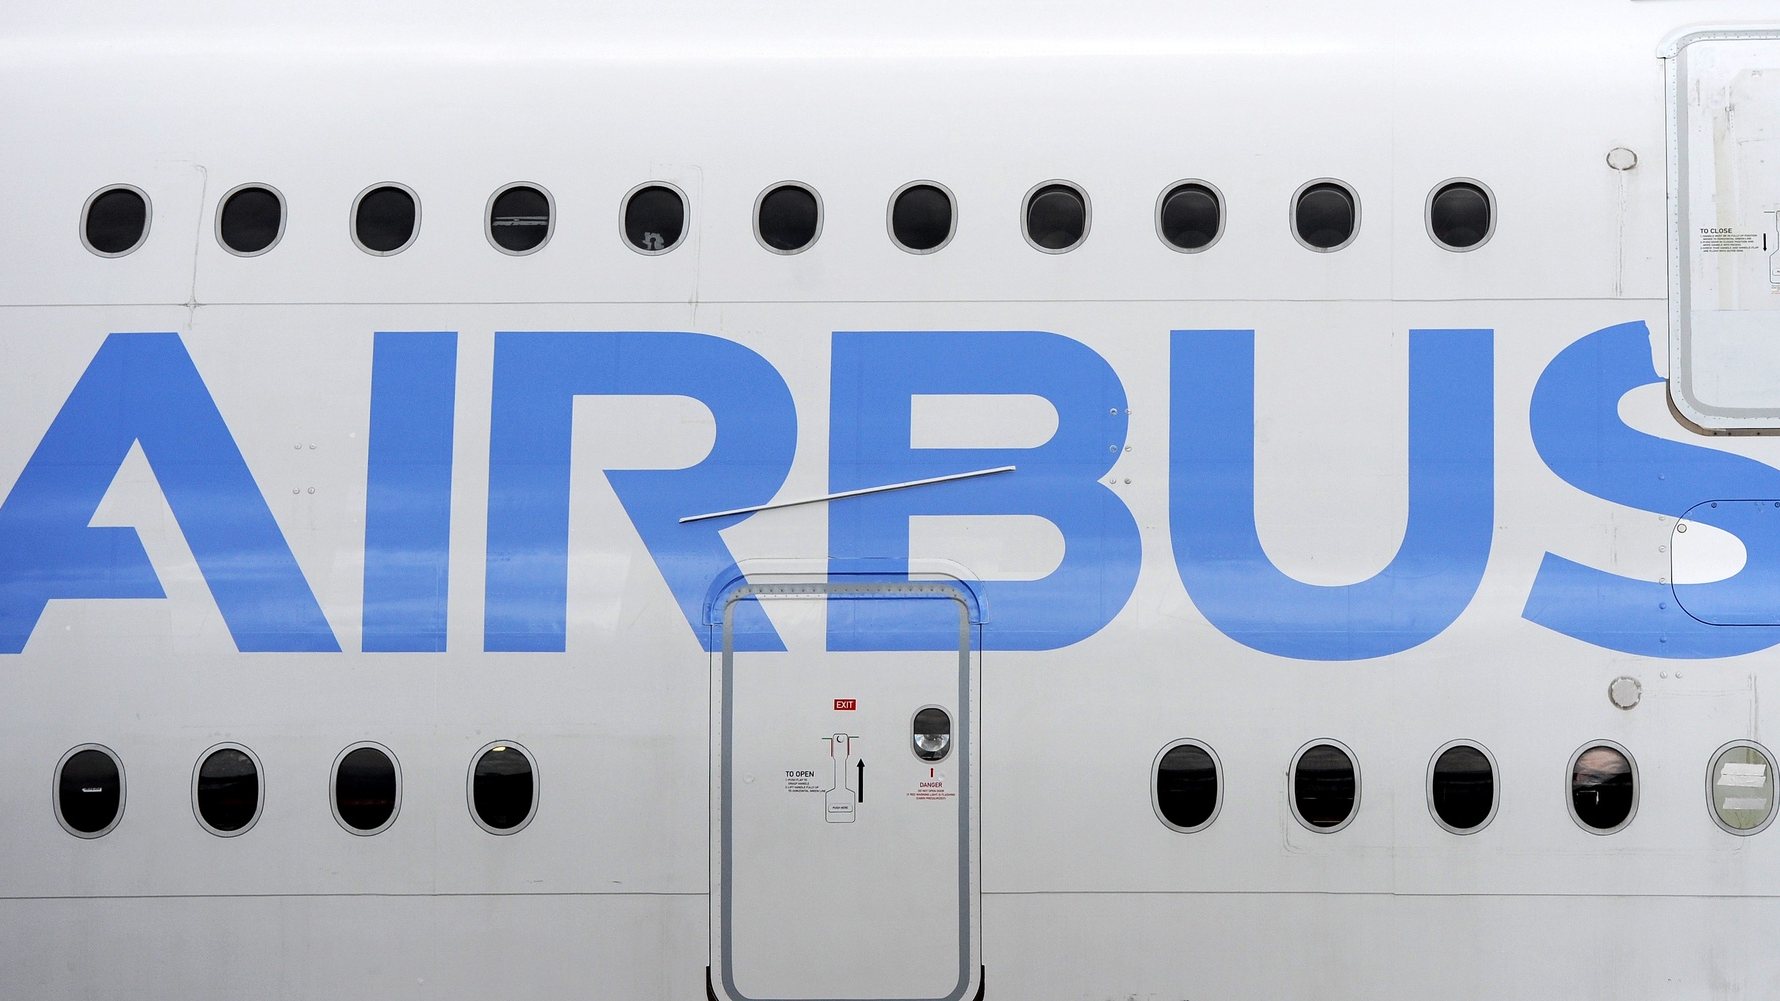 epa09017802 (FILE) - The Airbus logo on an A380 airplane at the Farnborough Airshow in Farnborough, Hampshire, south east England, 15 July 2014  (reissued 17 February 2021). Airbus will publish its financial year 2020 results on 18 February 2021.  EPA/ANDY RAIN *** Local Caption *** 56459604